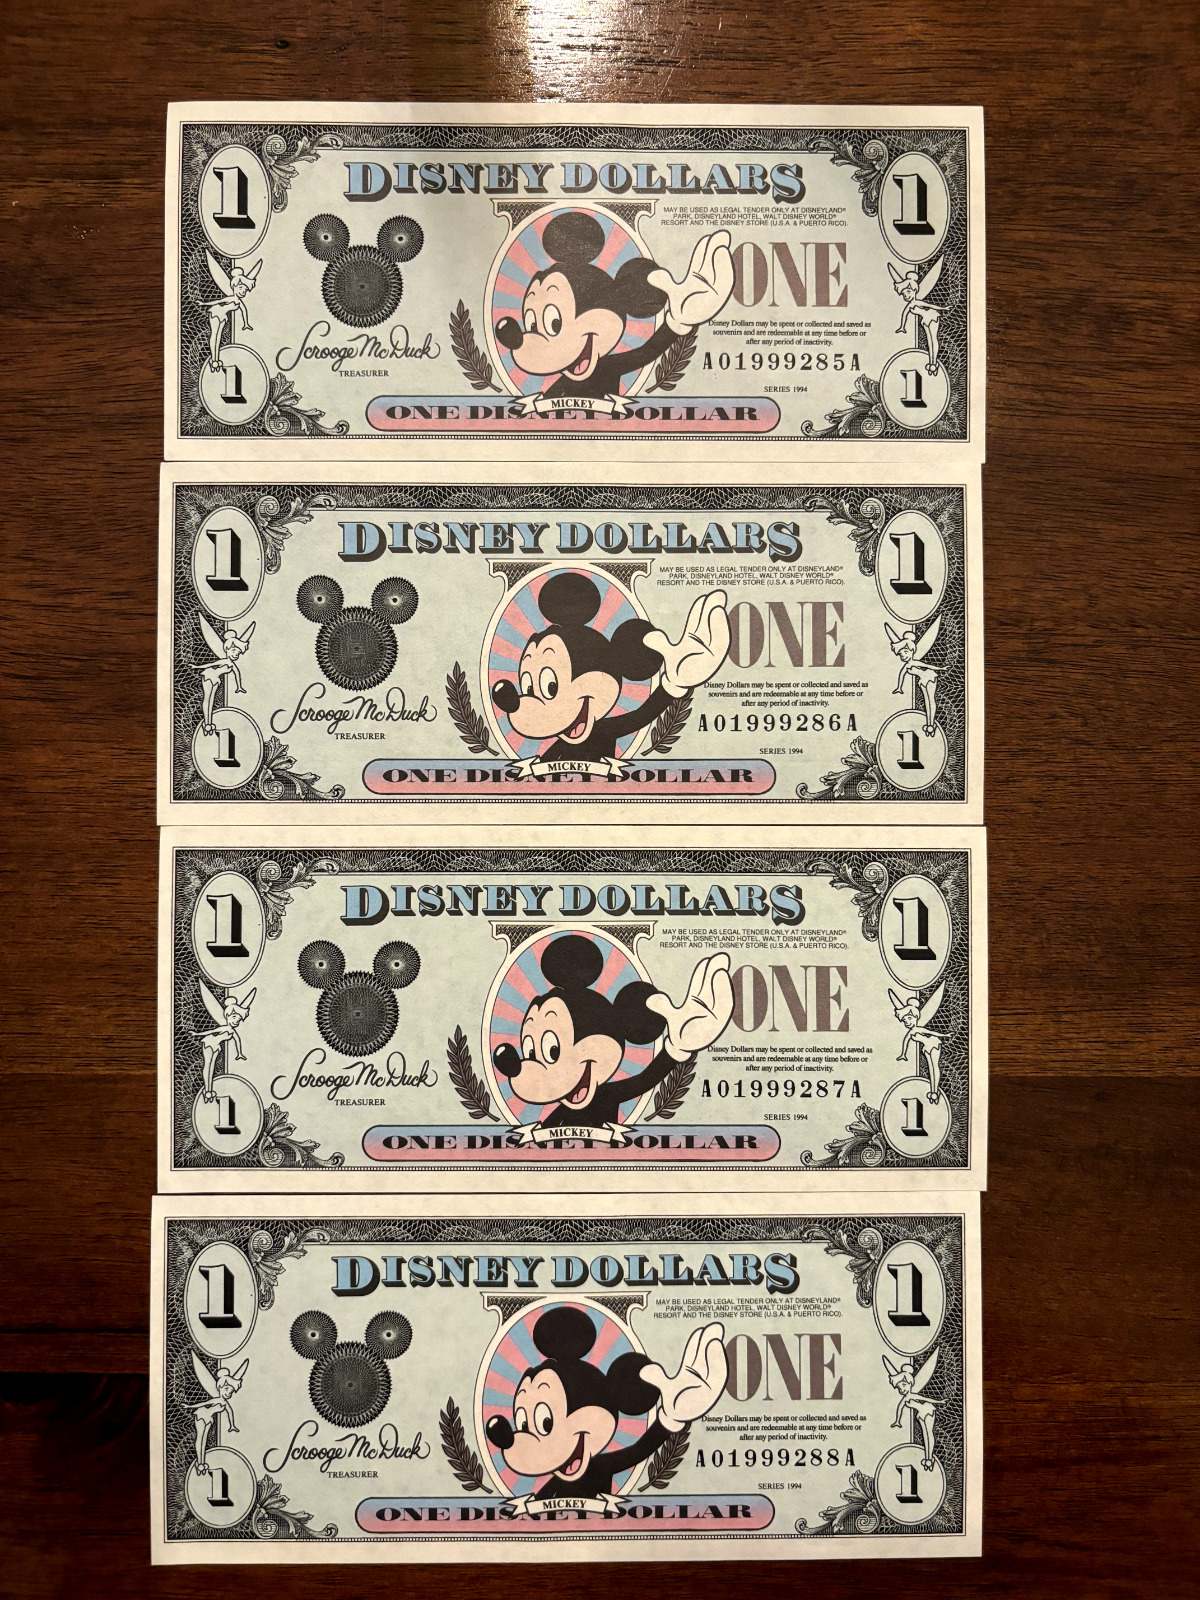 1994 Series A Sequential Mint Condition Disney Dollars - Portion to Make A Wish